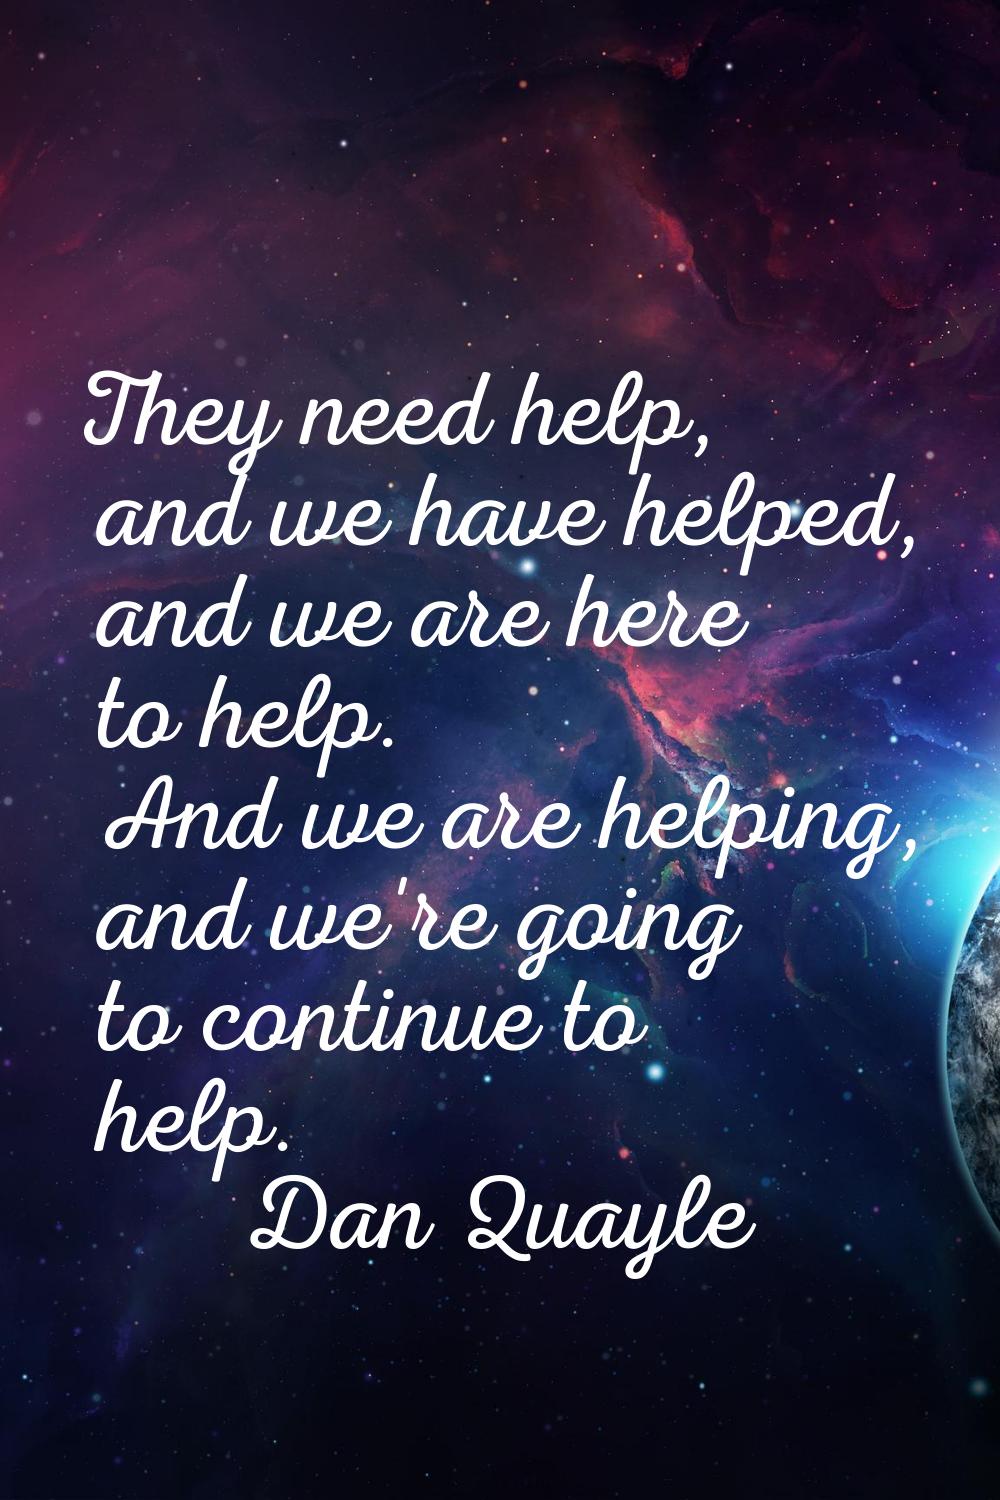 They need help, and we have helped, and we are here to help. And we are helping, and we're going to